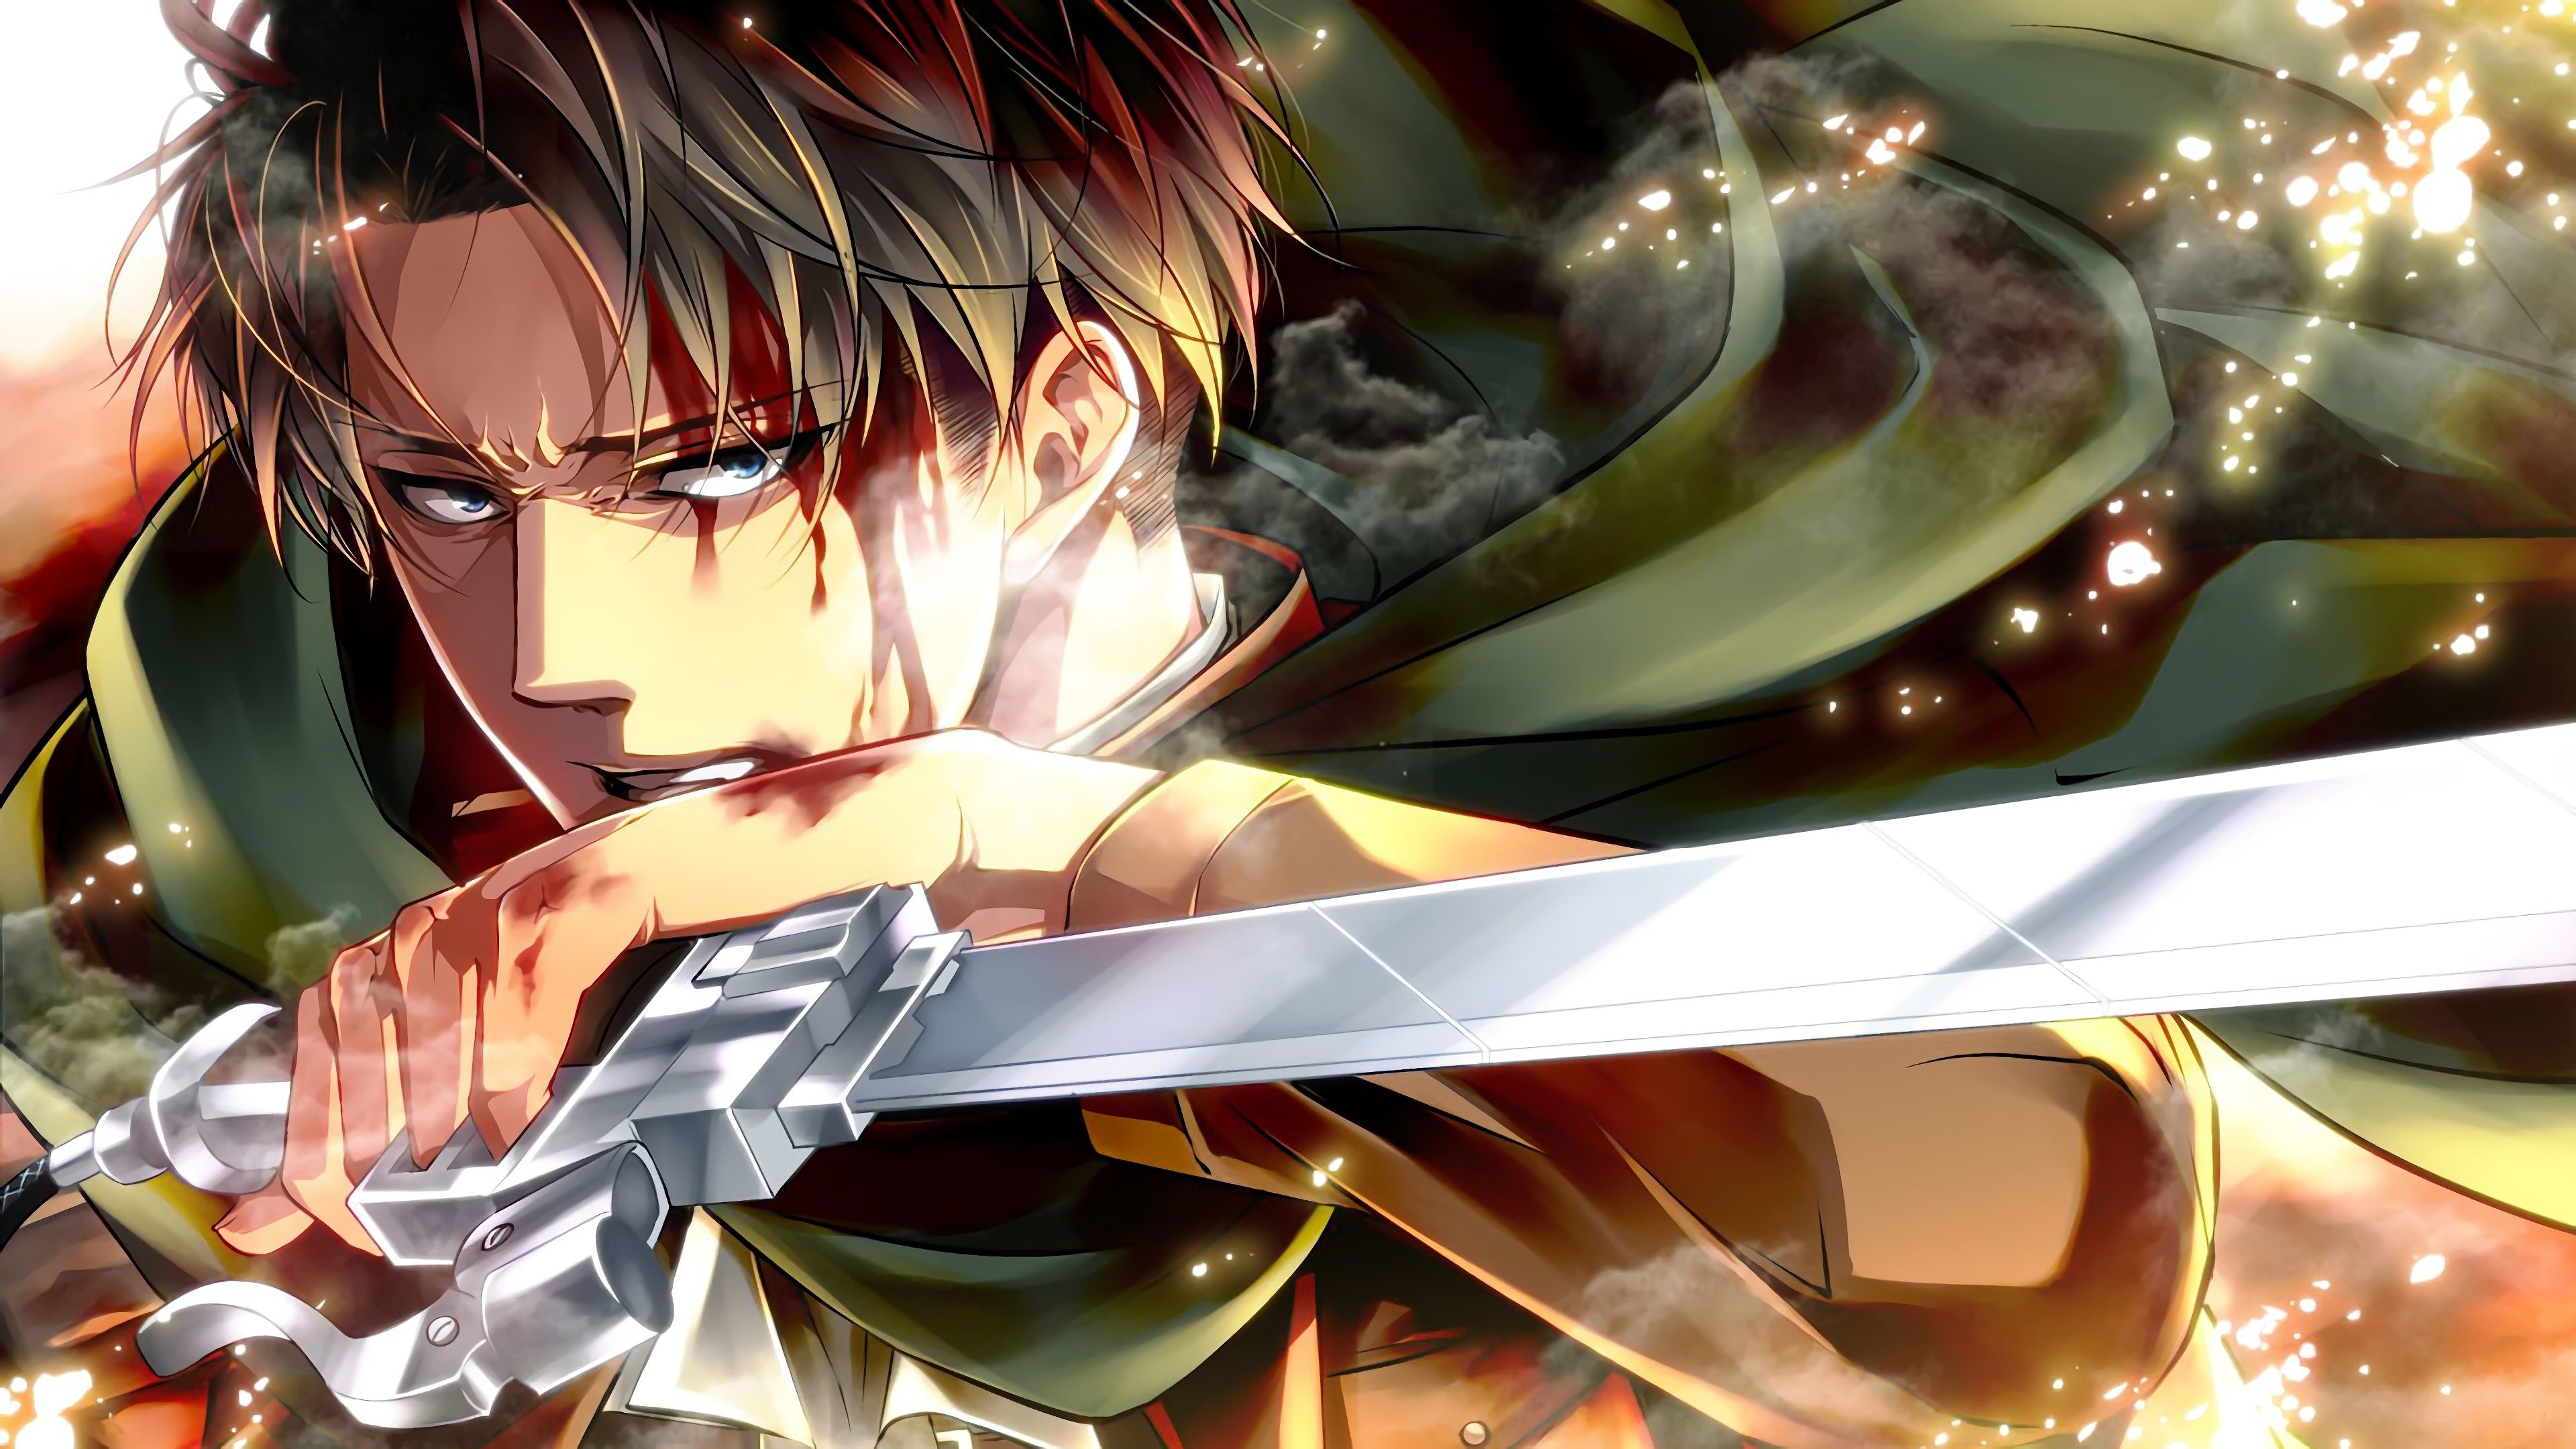 3. Levi Ackerman from Attack on Titan - wide 7